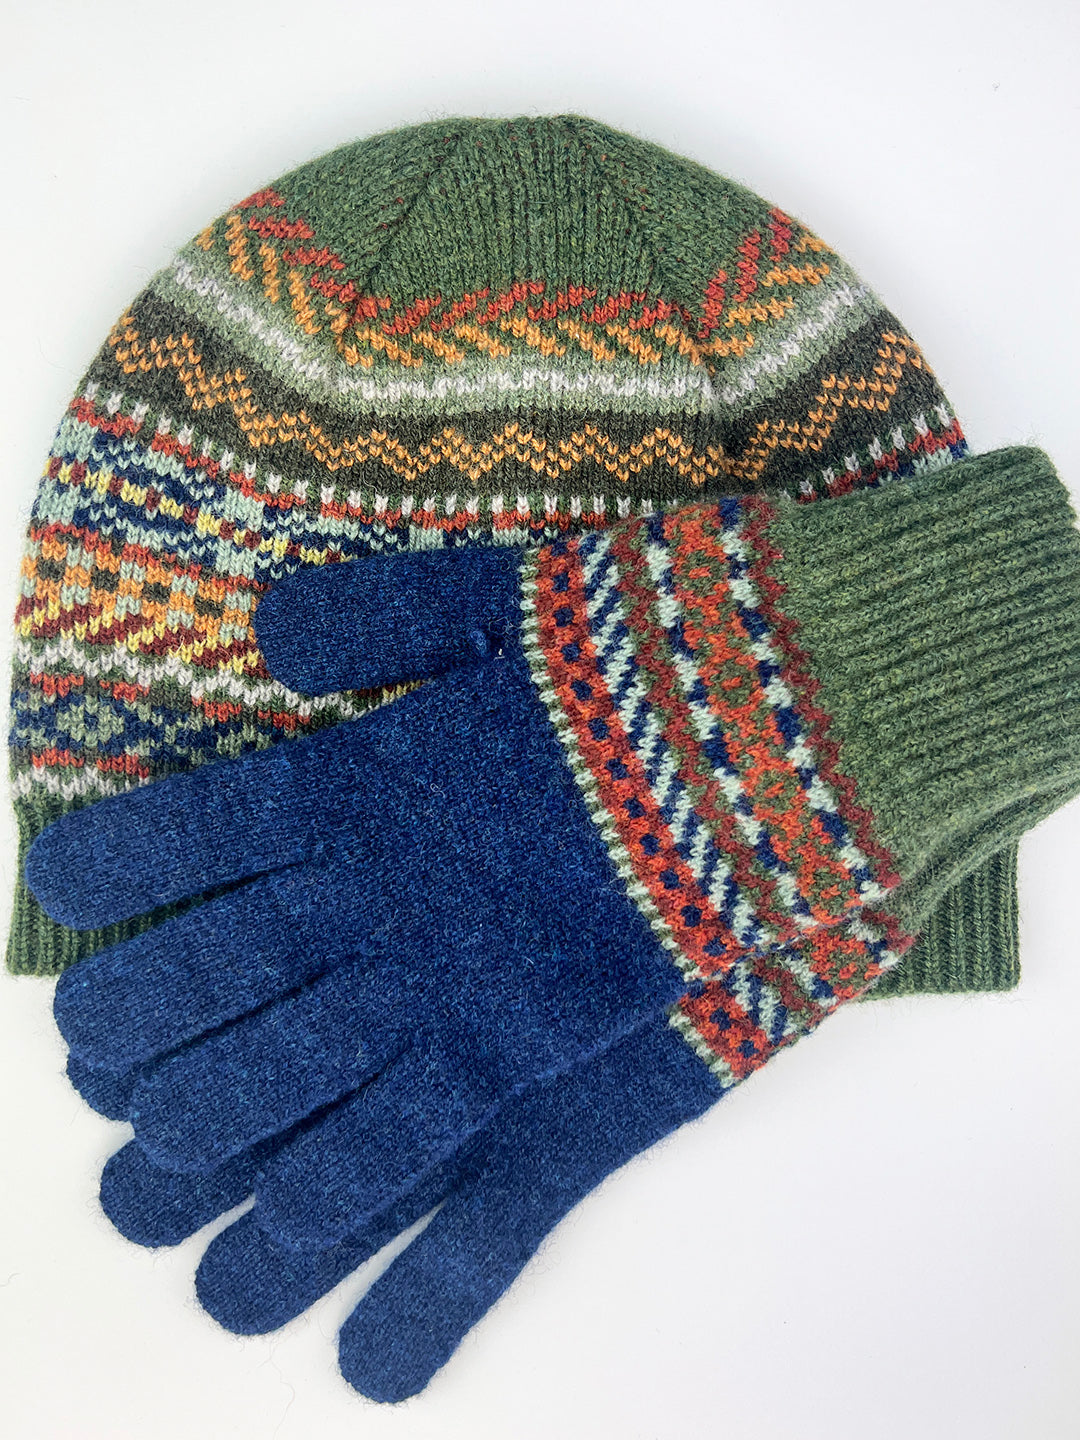 Knitted patterned gloves in Estate colour way, Knitted in Scotland.